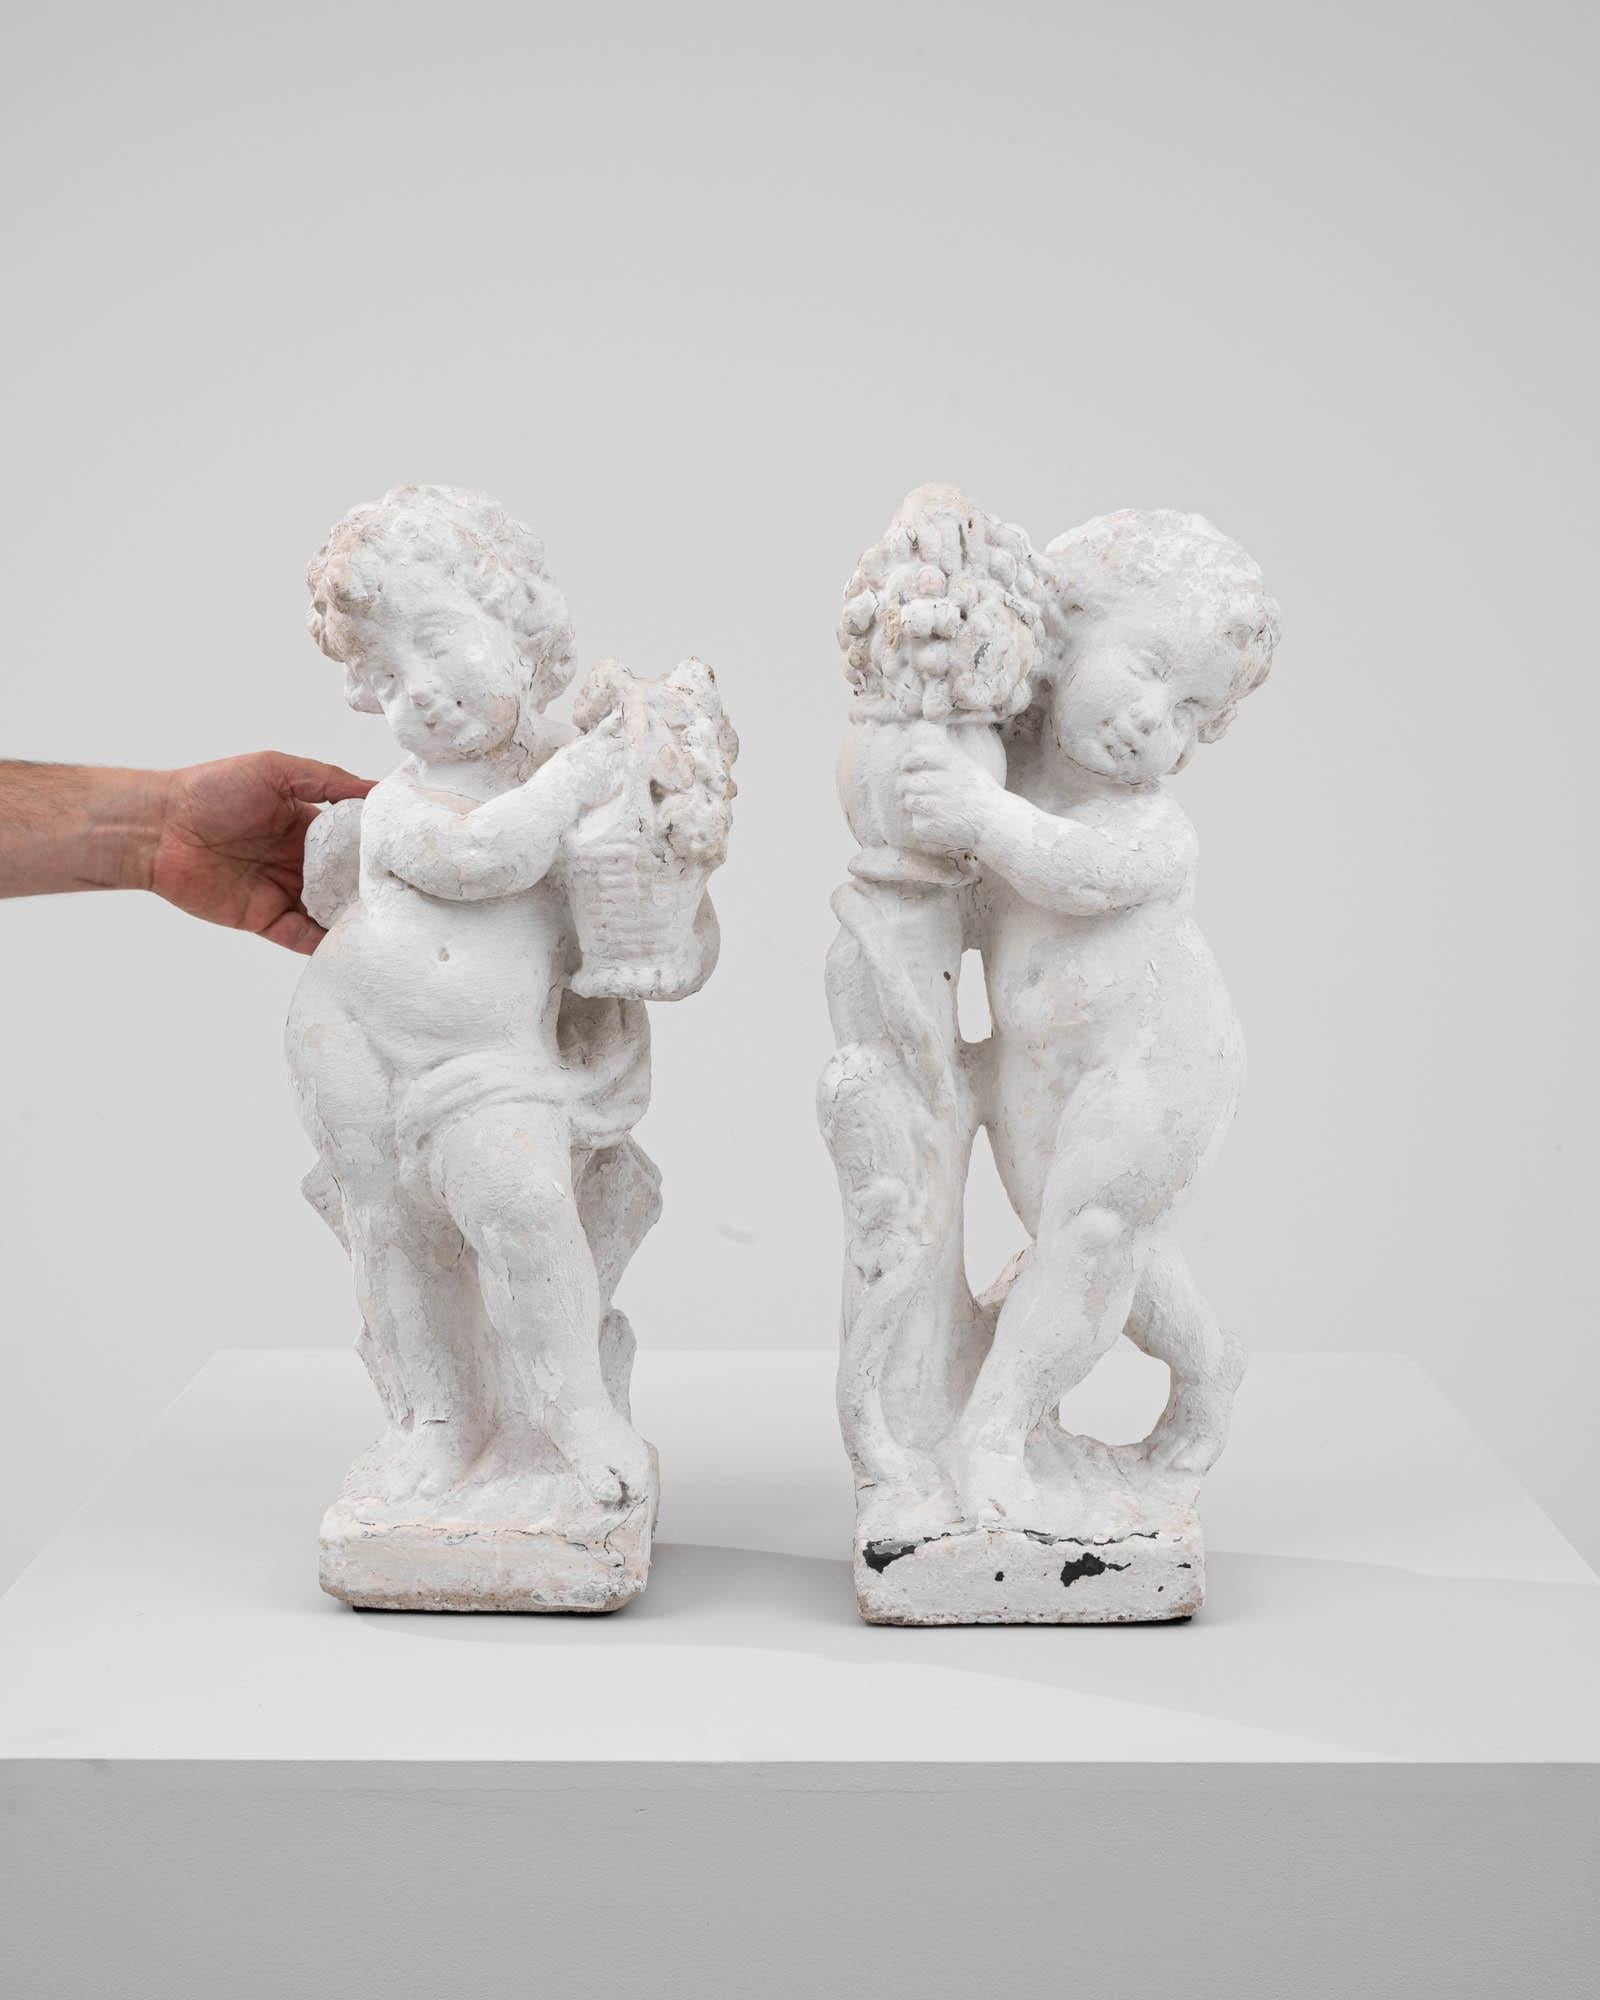 This pair of 20th Century French Concrete Angels captures the essence of pastoral charm, each tenderly clutching a bundle of flowers. The sculptures convey a sense of innocence and playfulness, with the angels' gestures suggesting a moment caught in